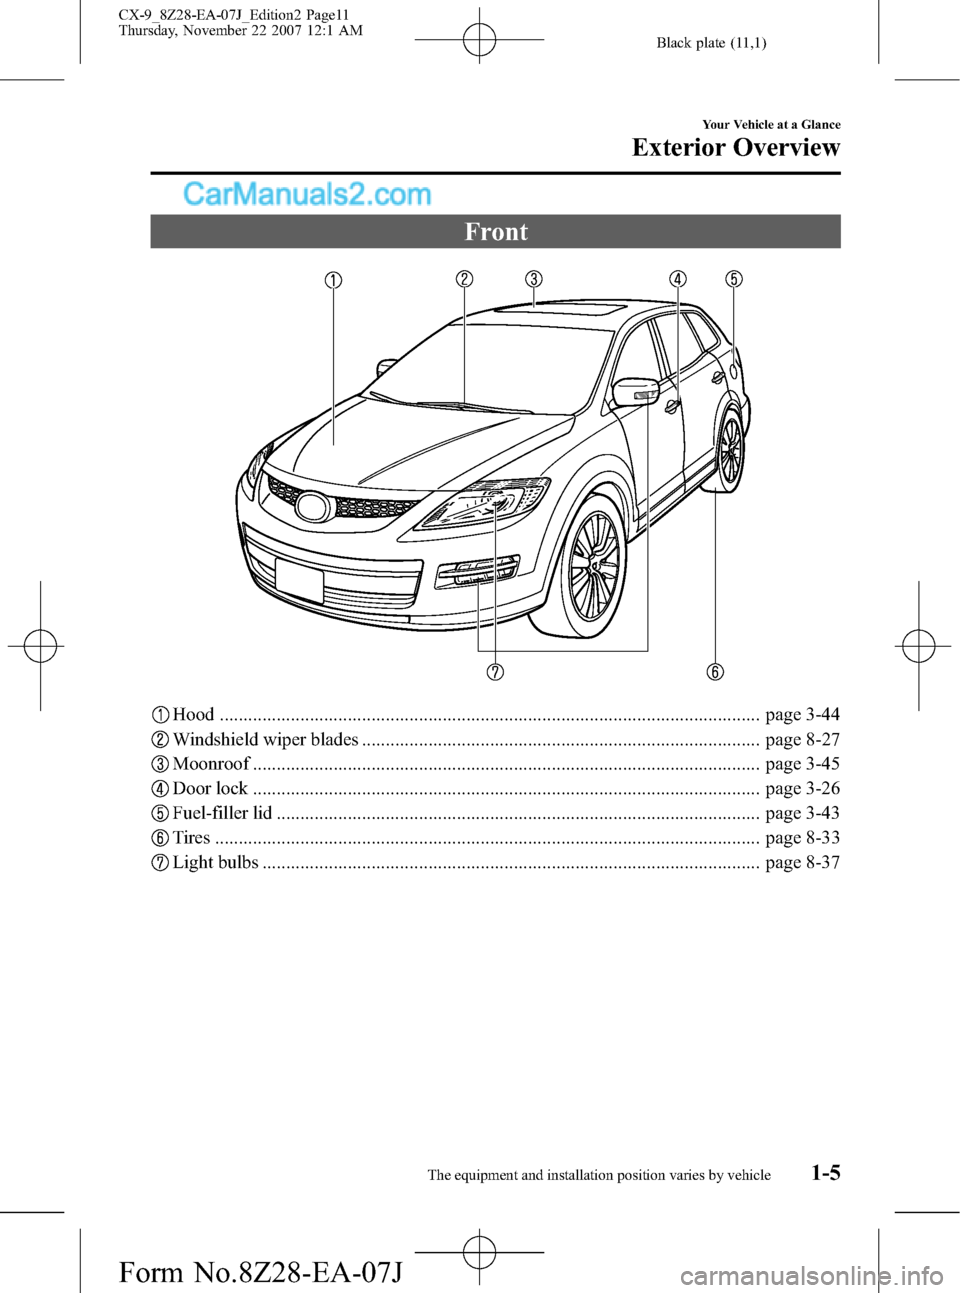 MAZDA MODEL CX-9 2008   (in English) User Guide Black plate (11,1)
Front
Hood .................................................................................................................. page 3-44
Windshield wiper blades .....................